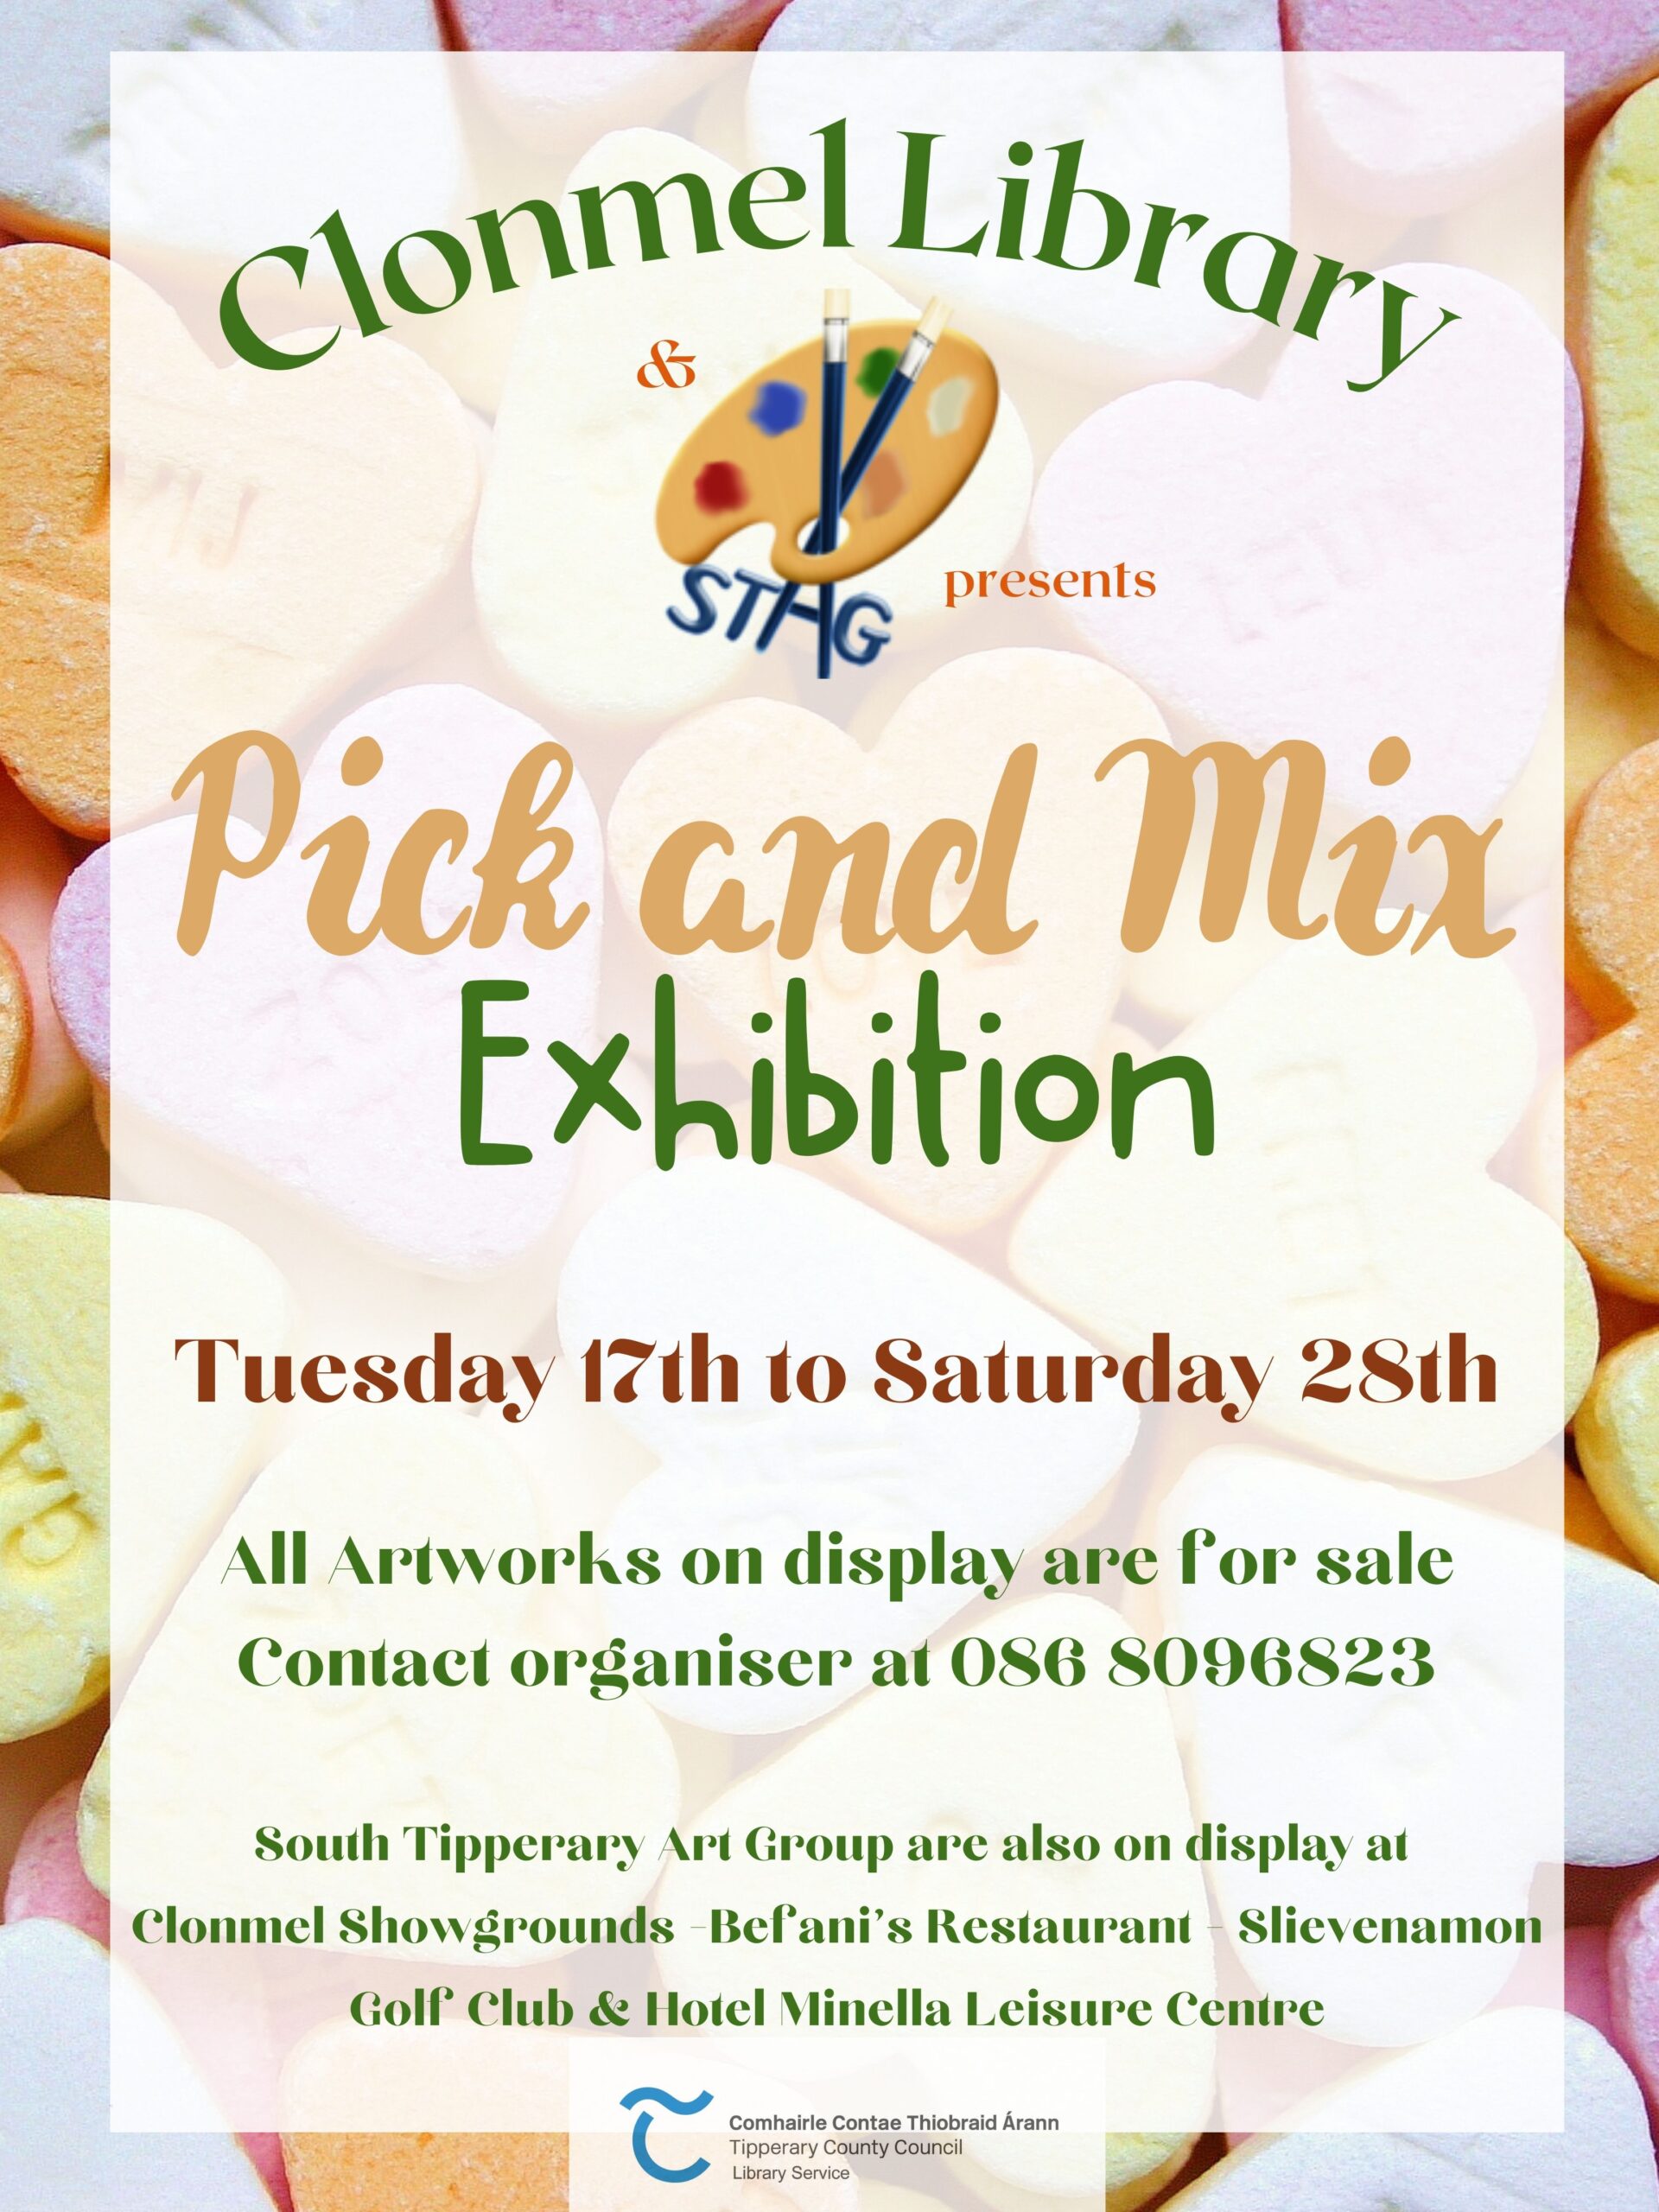 Clonmel Library and South Tipperary Arts Group Pick and Mix Exhibition Running from 17th to 28th January in Clonmel Library South Tipperary Art Group are also on display at Clonmel Showgrounds, Befani's Restaurant, Slievenamon Golf Club & Hotel Minella Leisure Centre